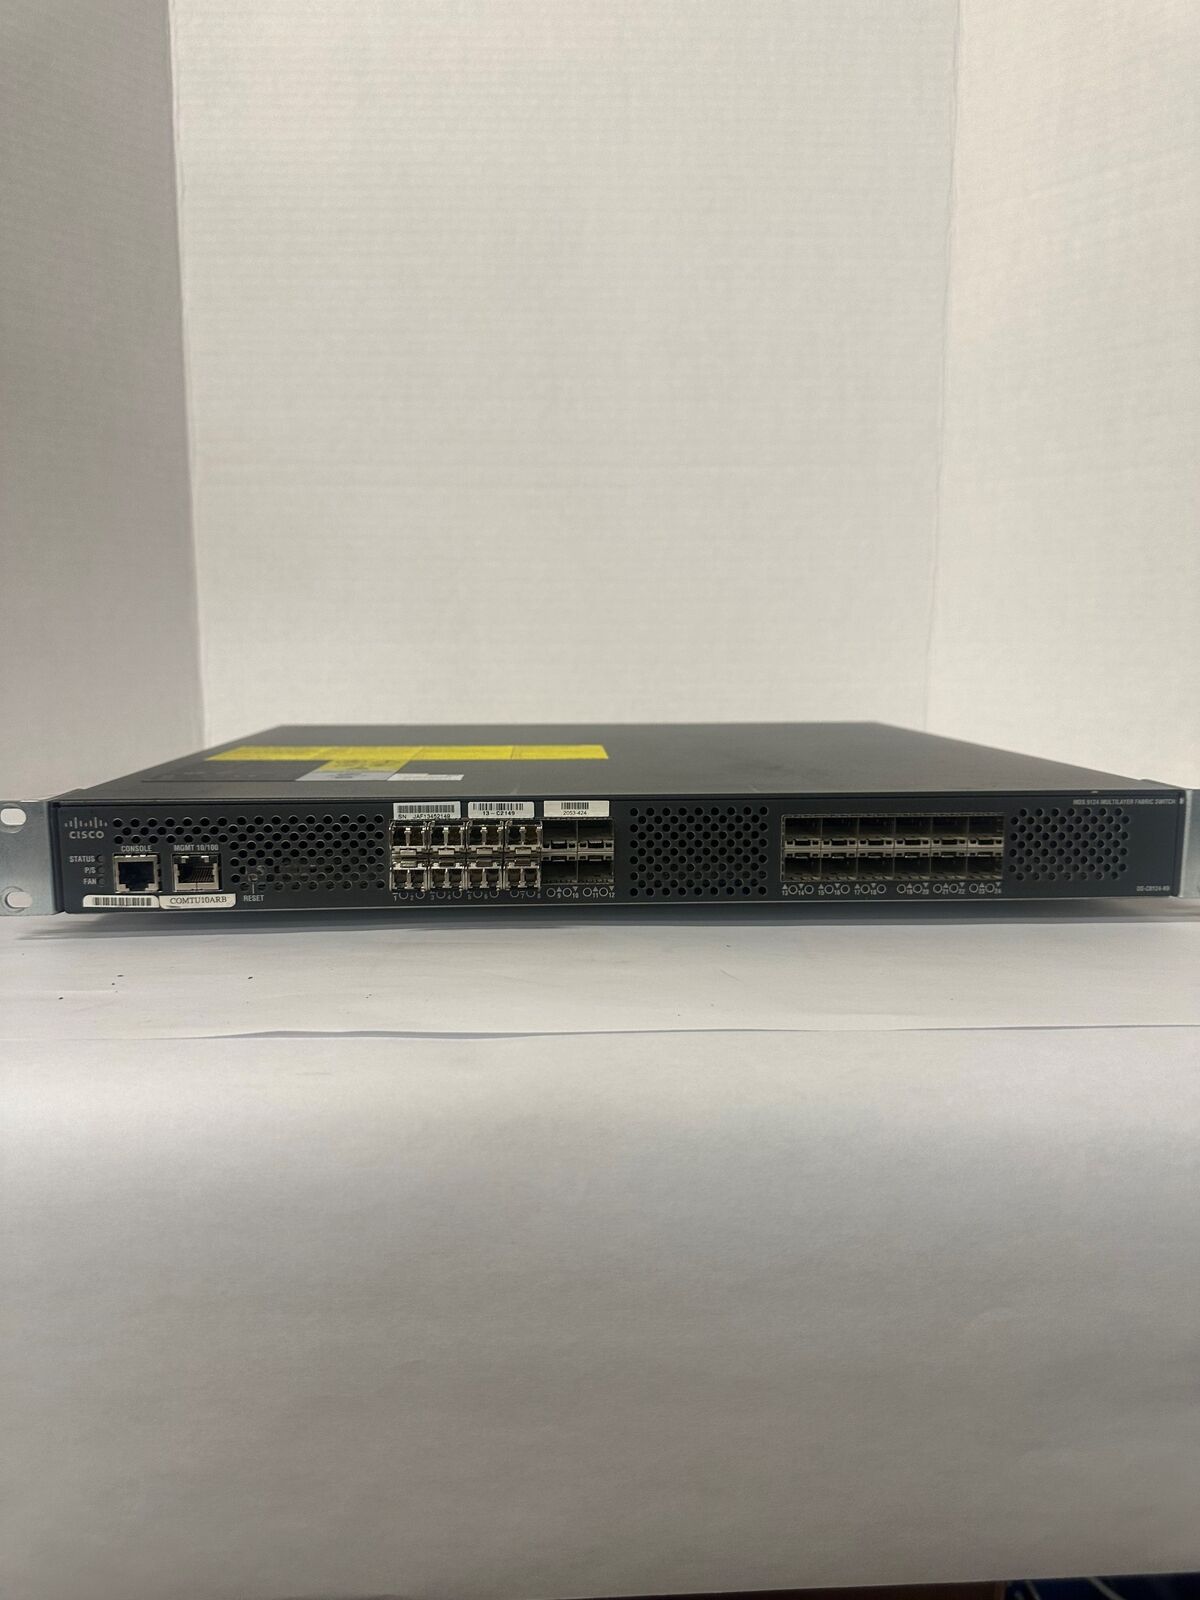 Cisco DS-C9124-K9 MDS 9124 24 Port Multilayer Fabric Switch